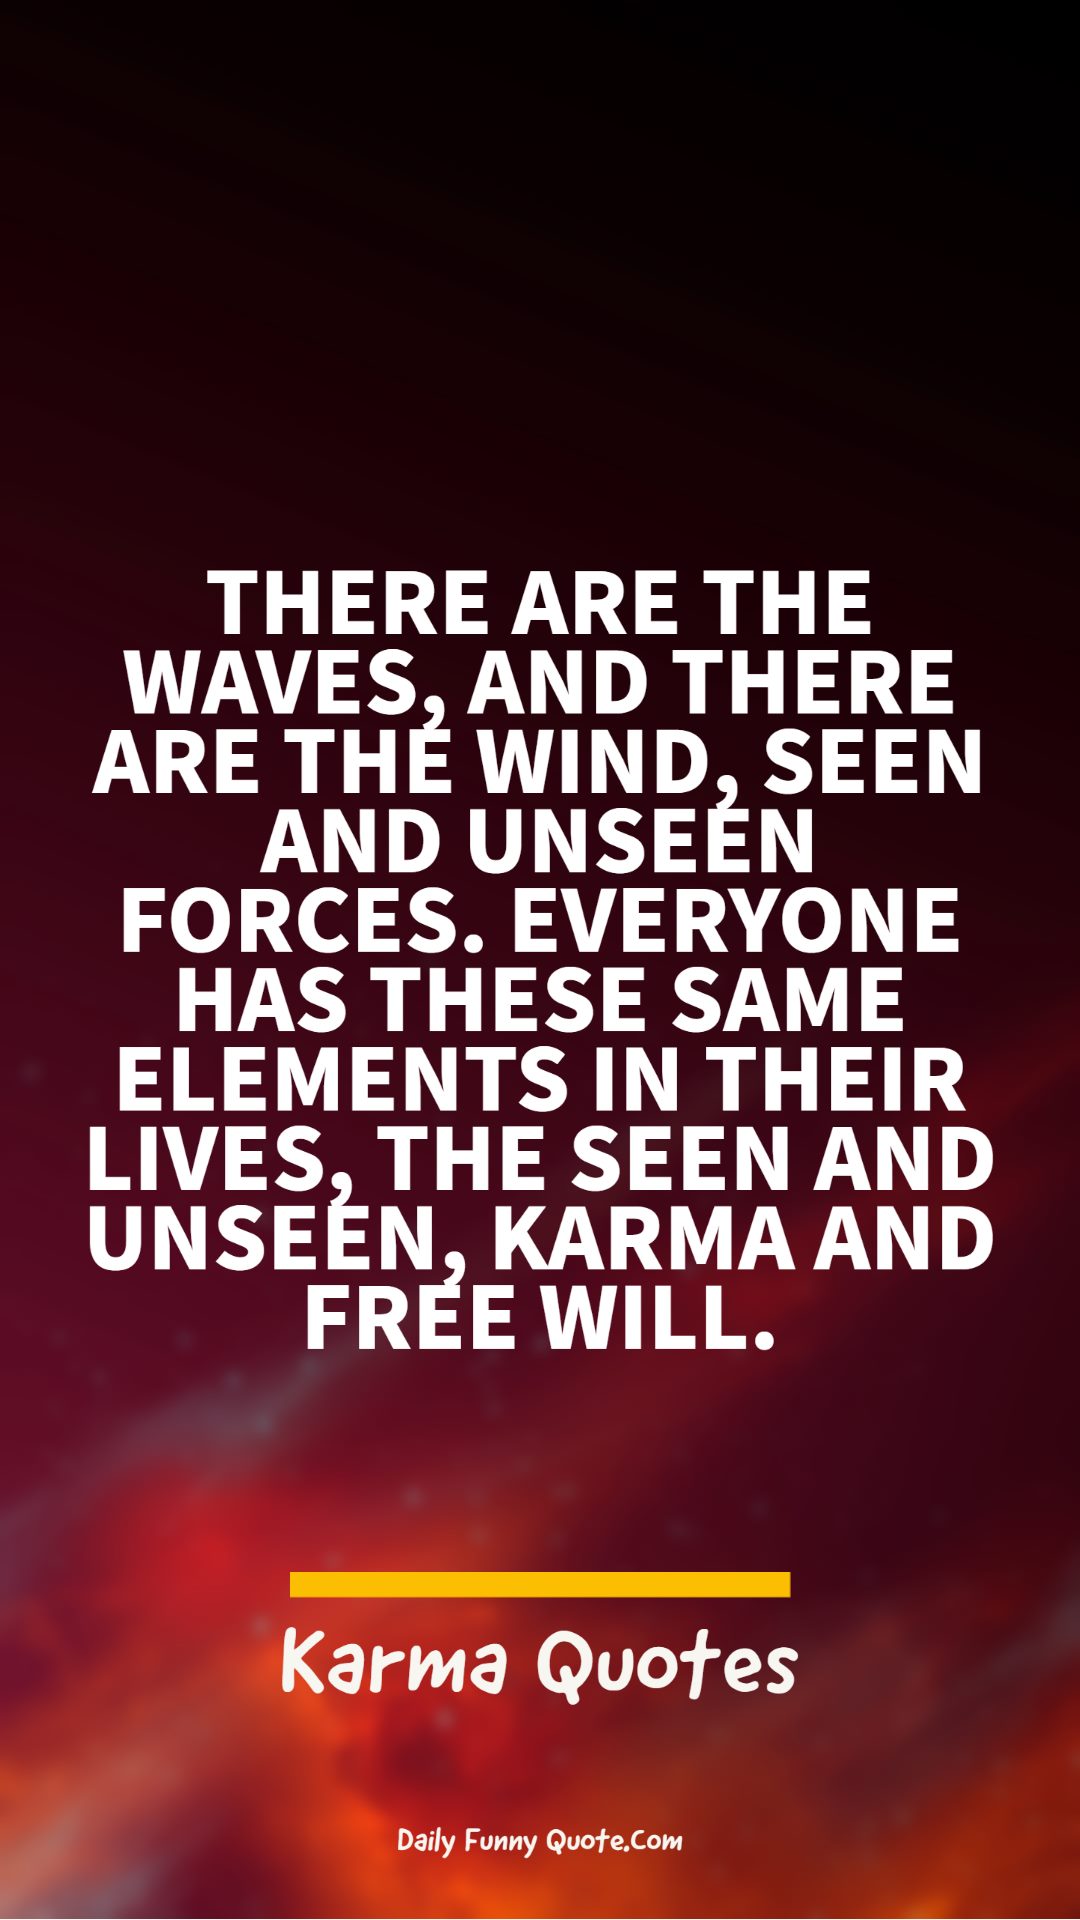 powerful karma quotes on what goes around